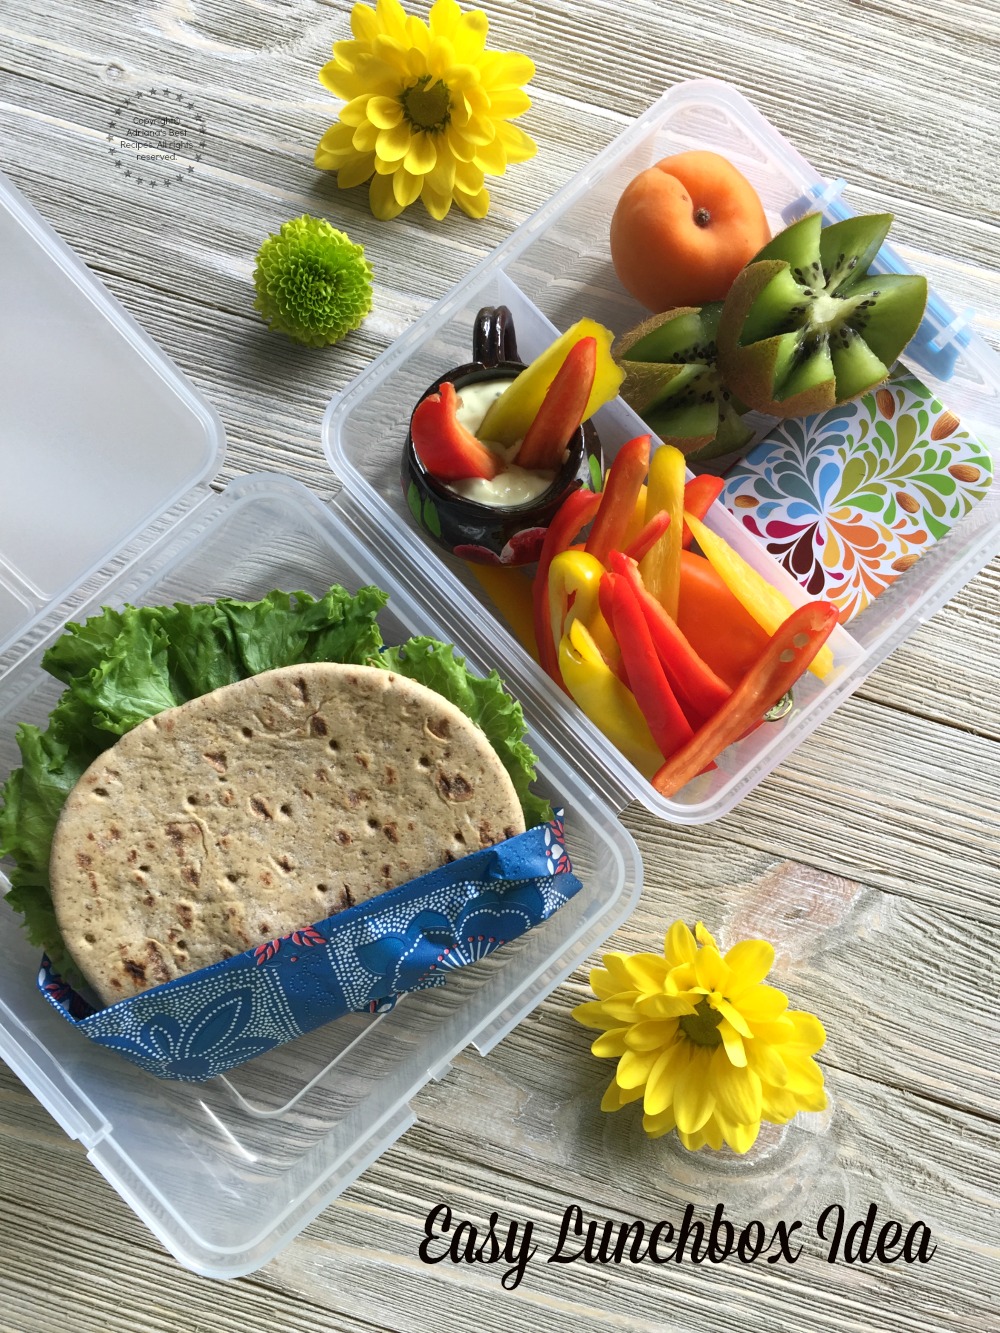 This back to school season we are proposing an easy lunchbox idea for powering our lunchbox and taking the pledge for packing a healthier yummy lunch